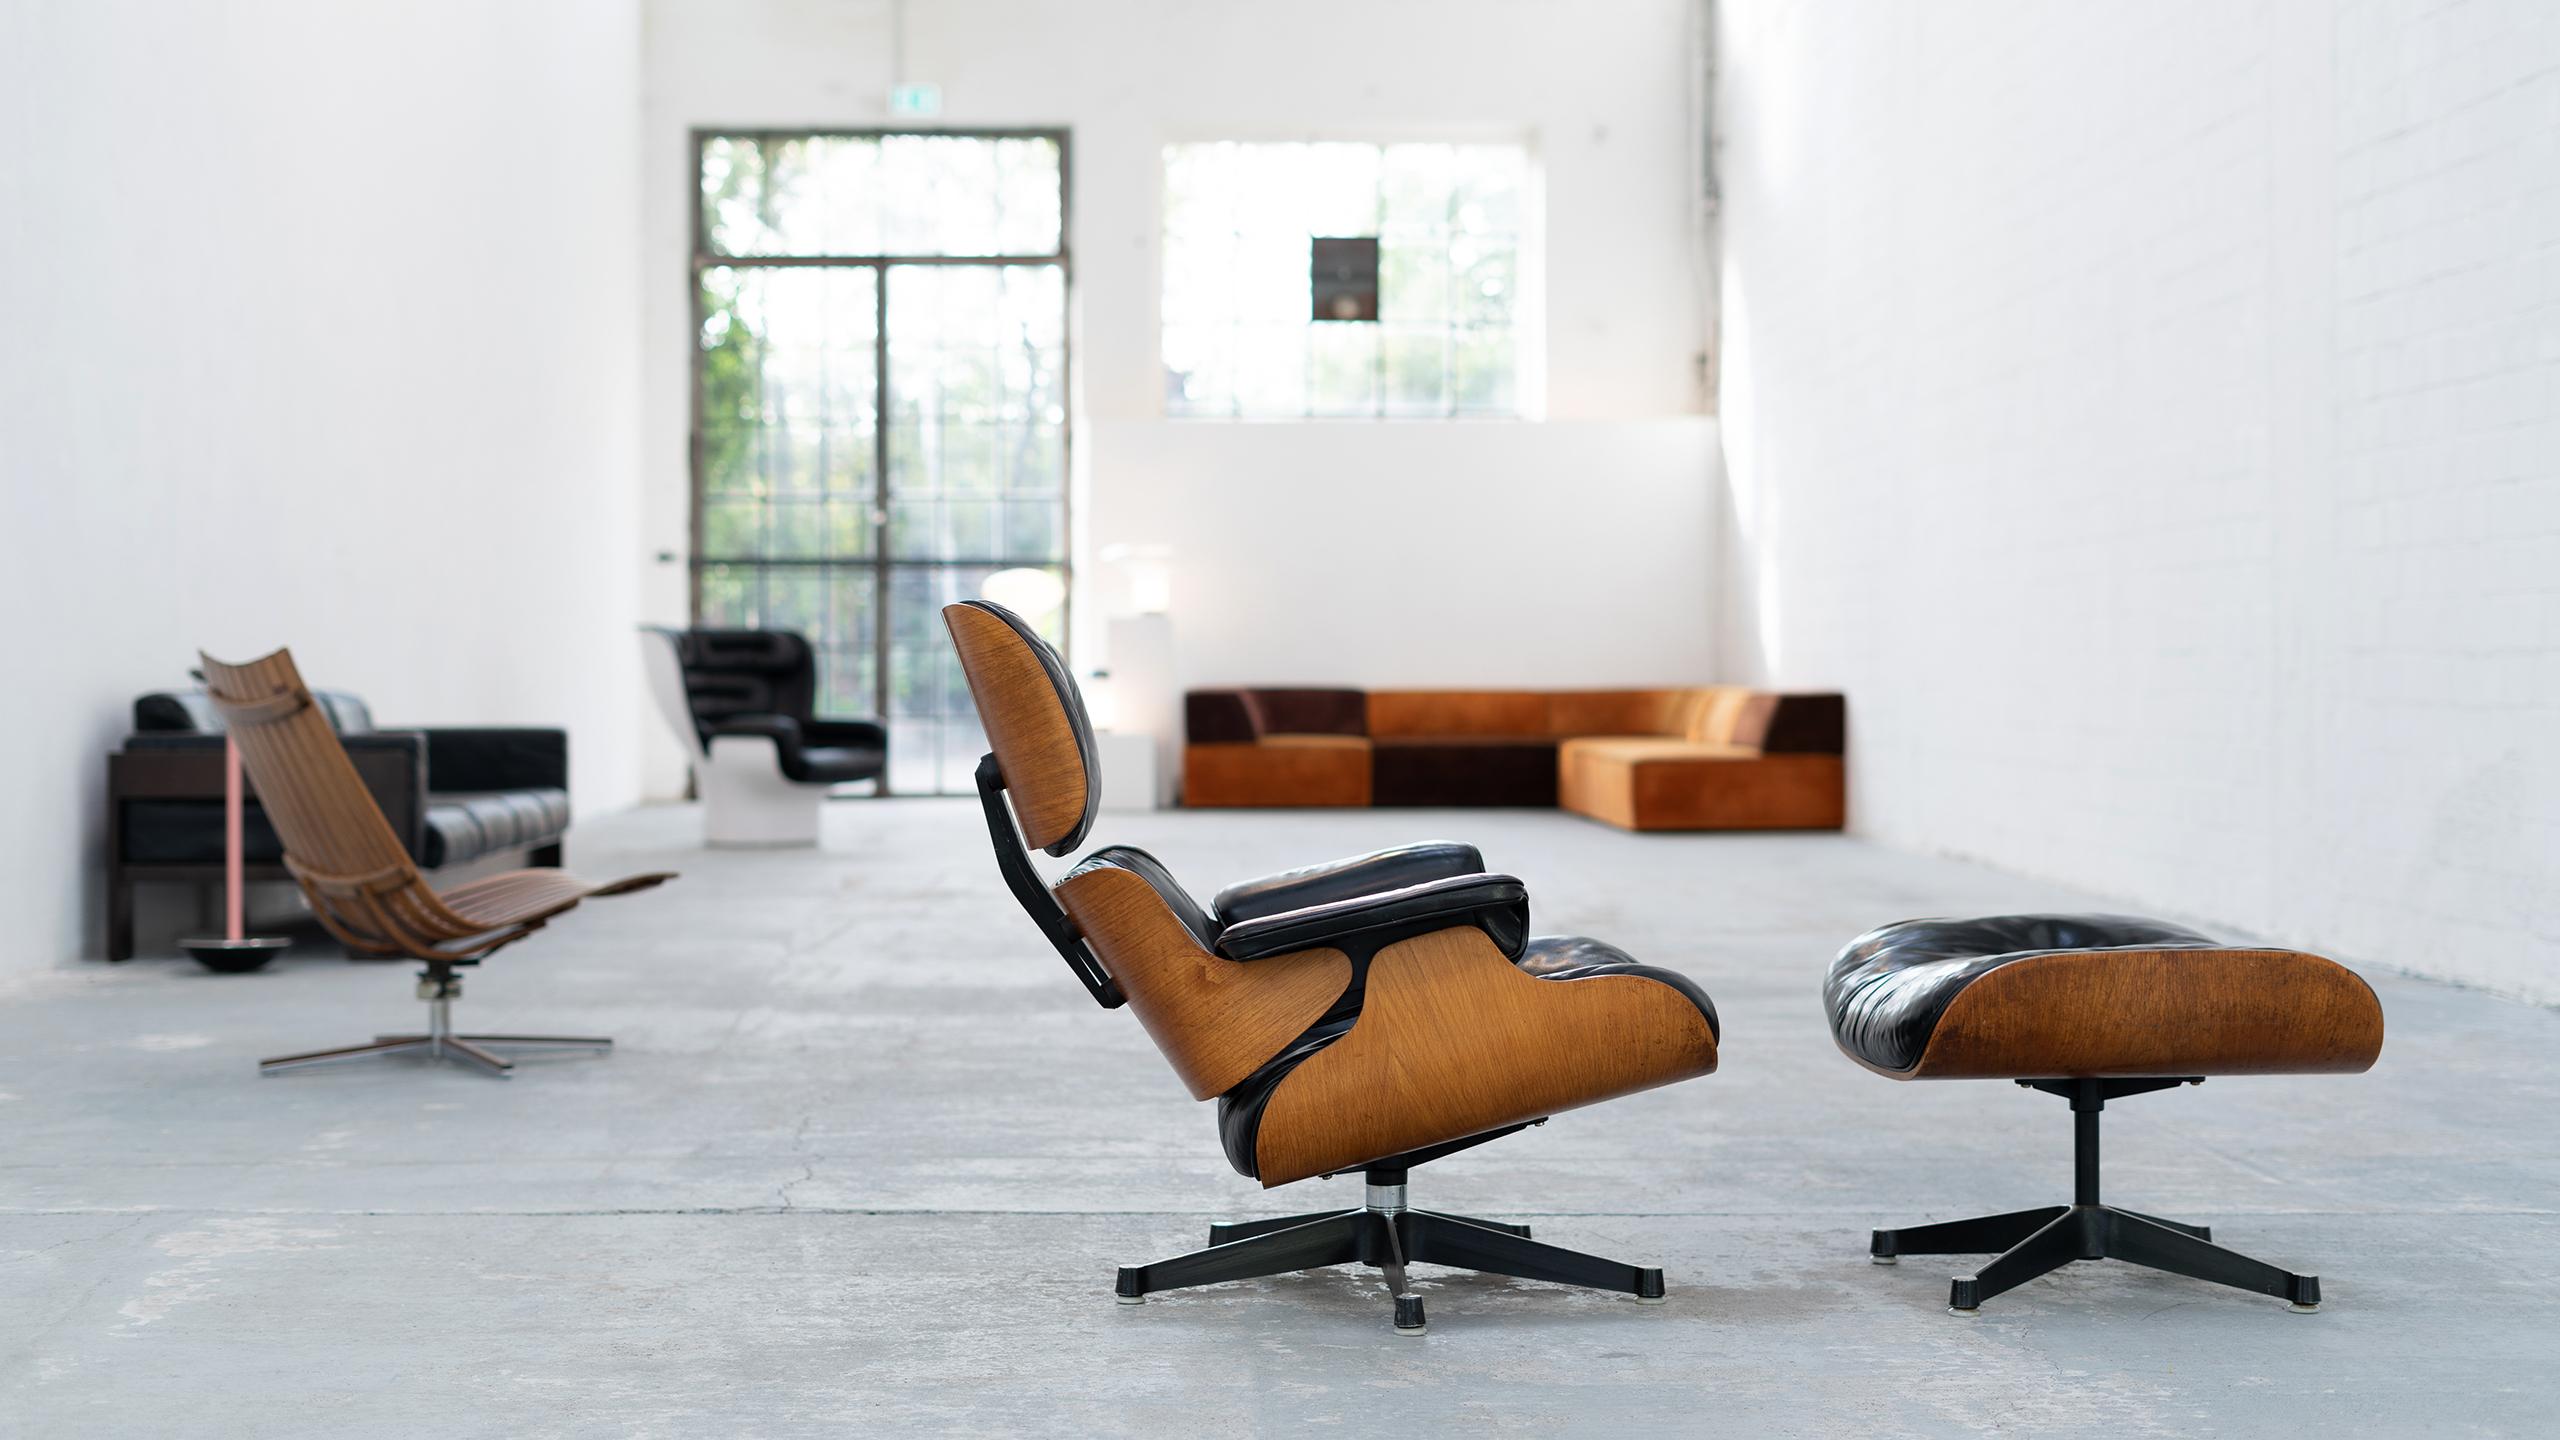 Very early Charles & Ray Eames lounge chair with ottoman from European version contura, 1957-1965. The lounge chair is in very good condition and absolutely collectible.

An absolutely rare collector's edition in original condition. We have